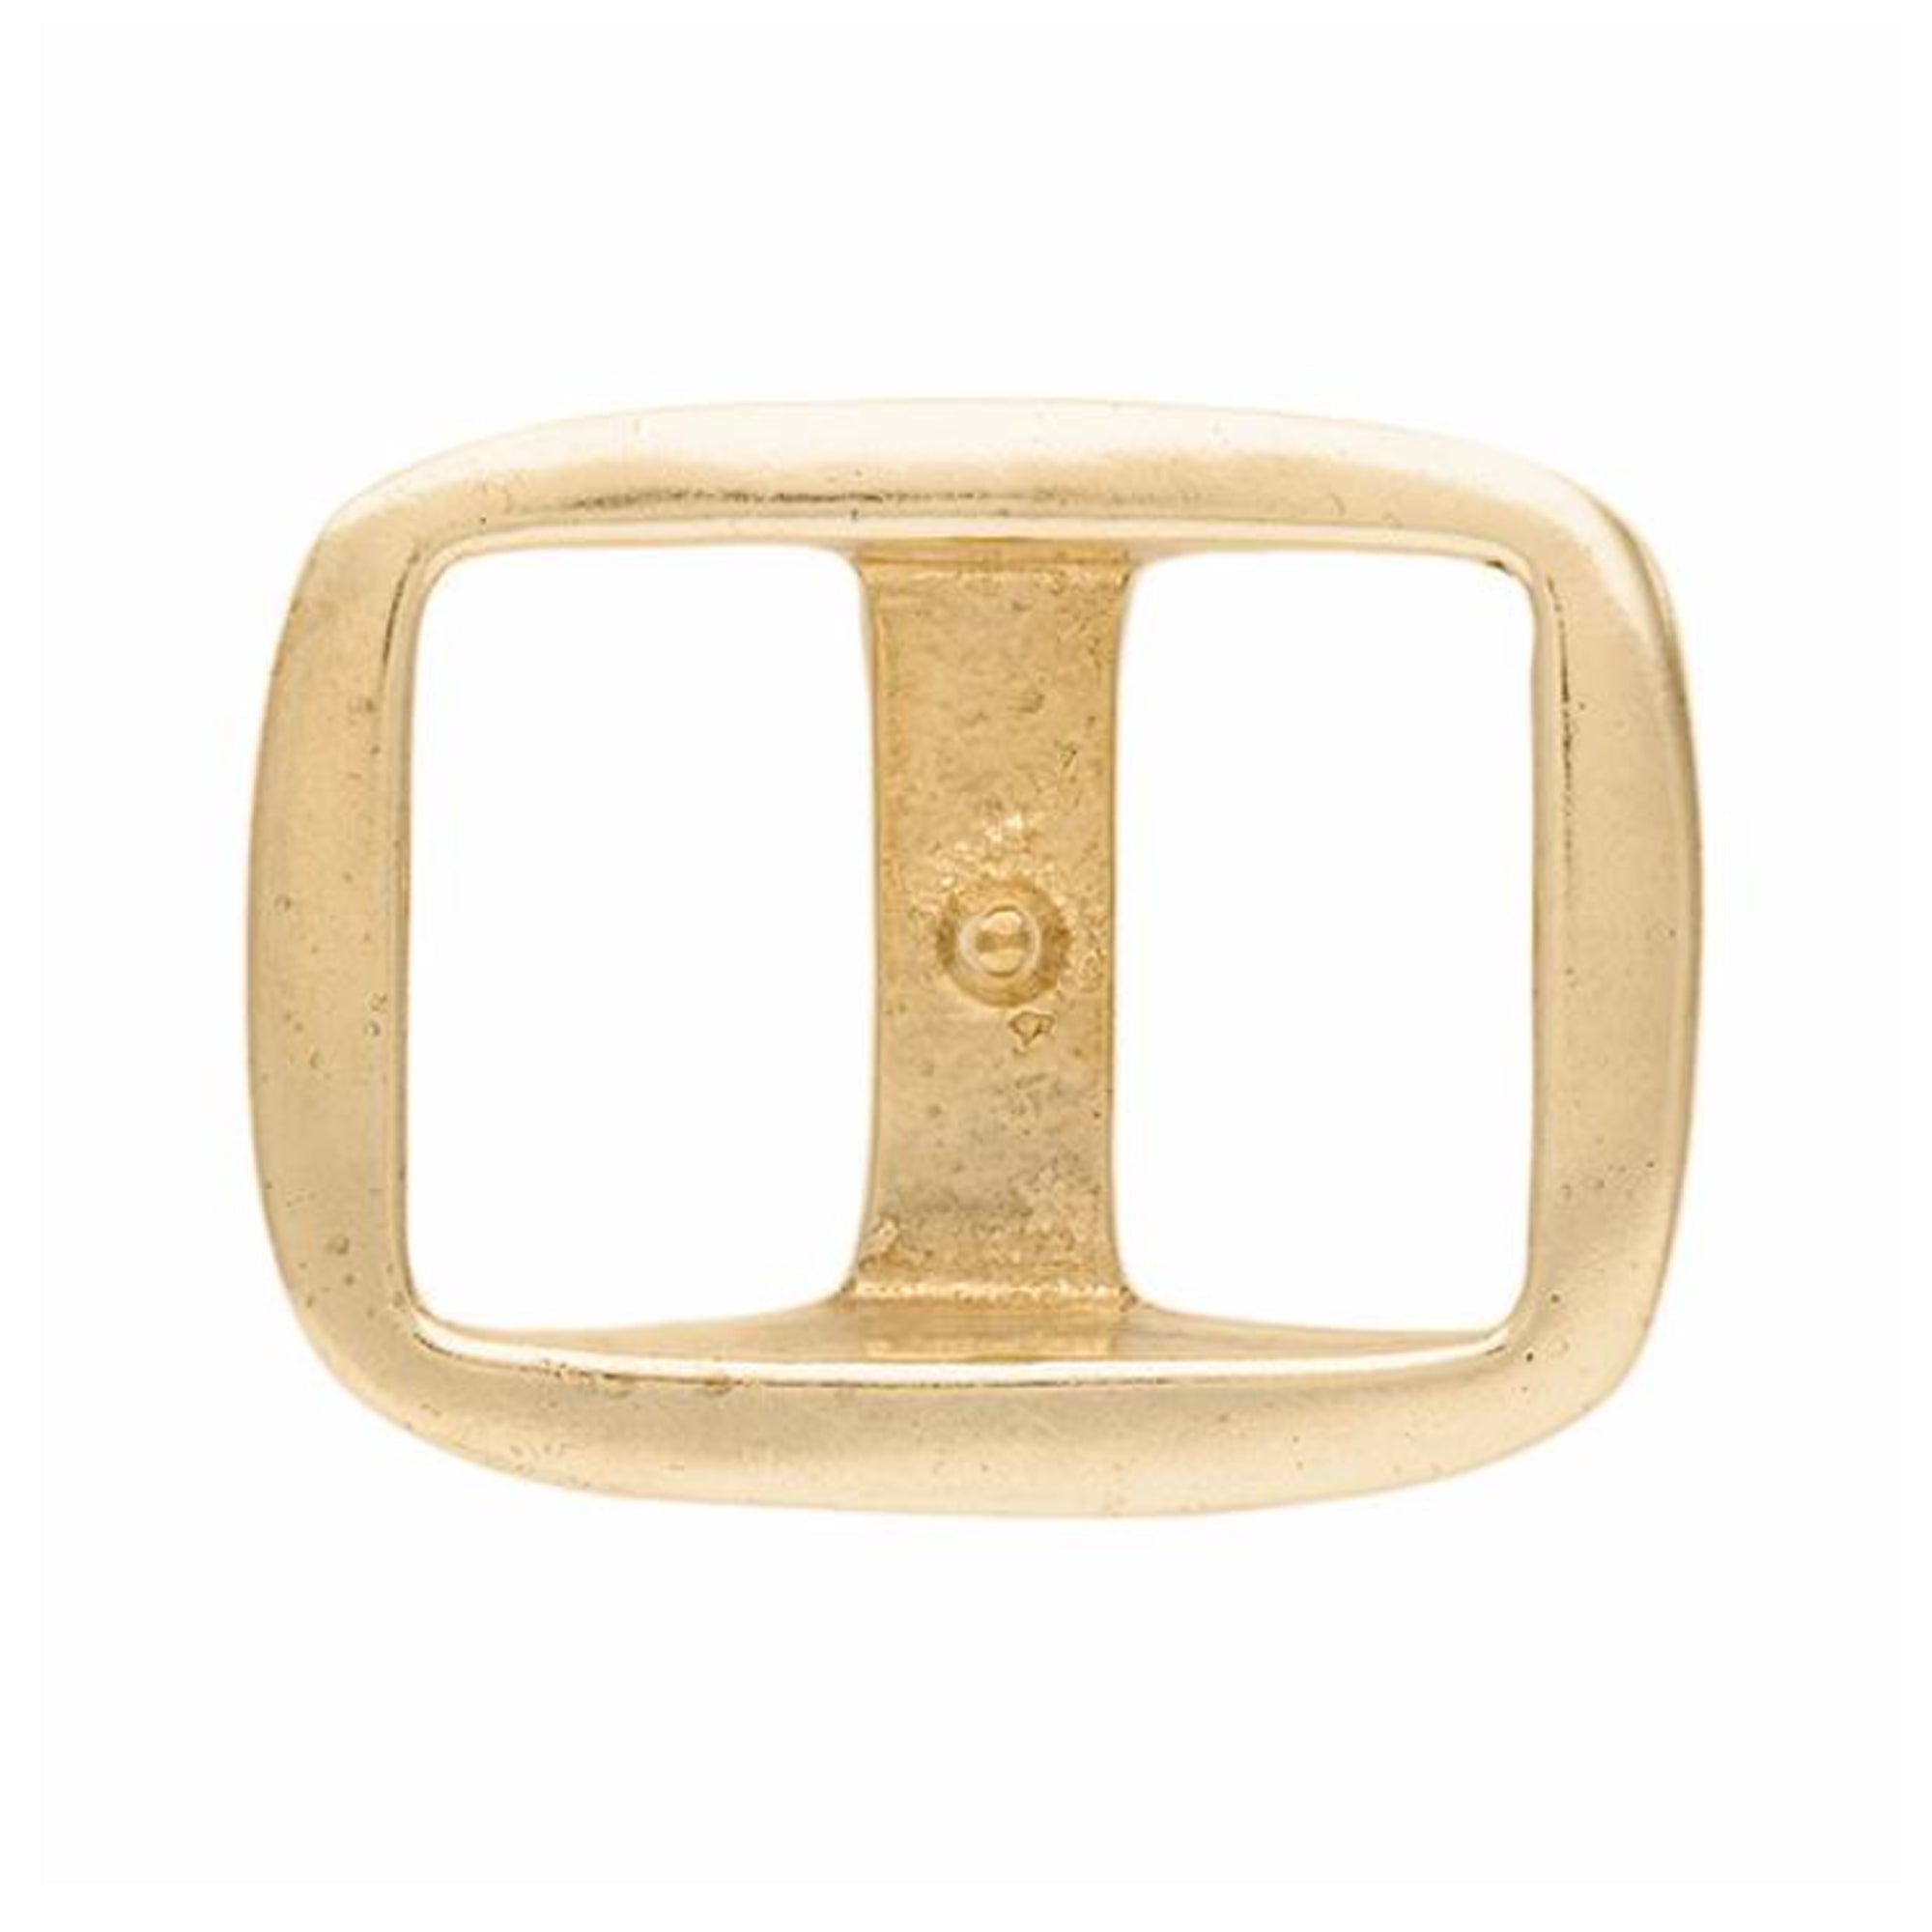 #545 Solid Brass Conway Buckle 1-3/4"